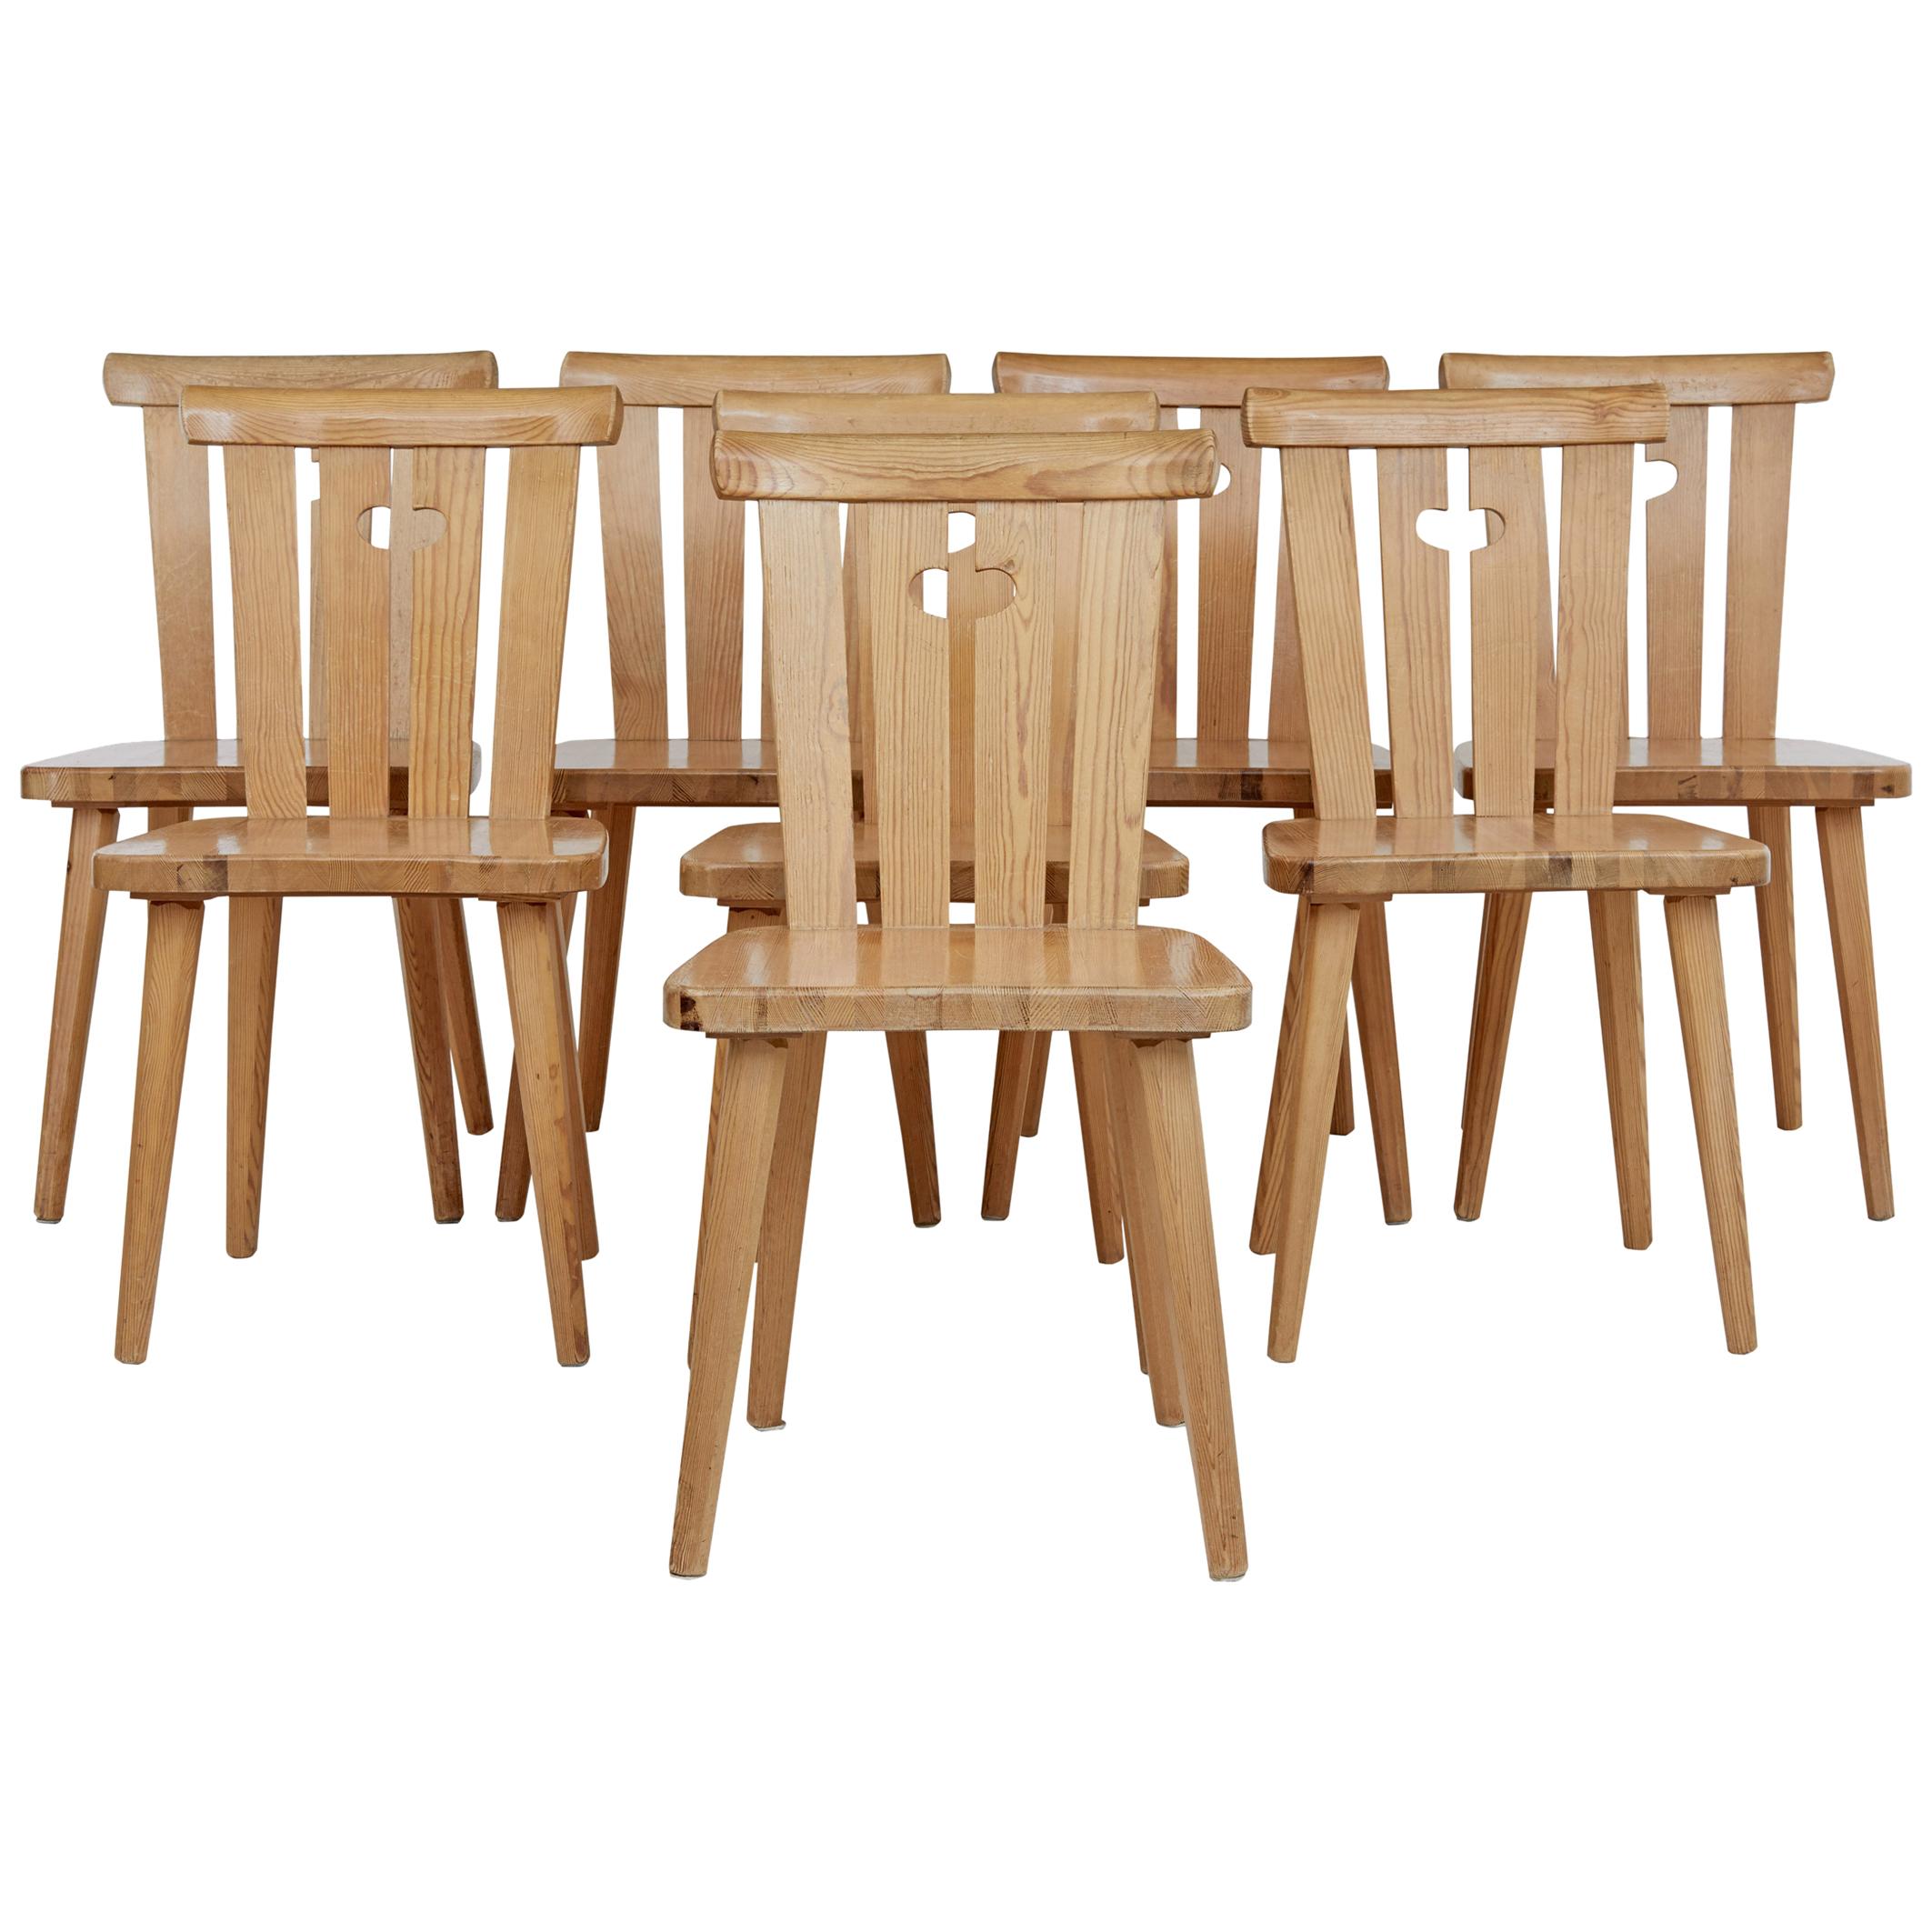 Set of 8 Mid-20th Century Swedish Pine Dining Chairs by Svensk Fur